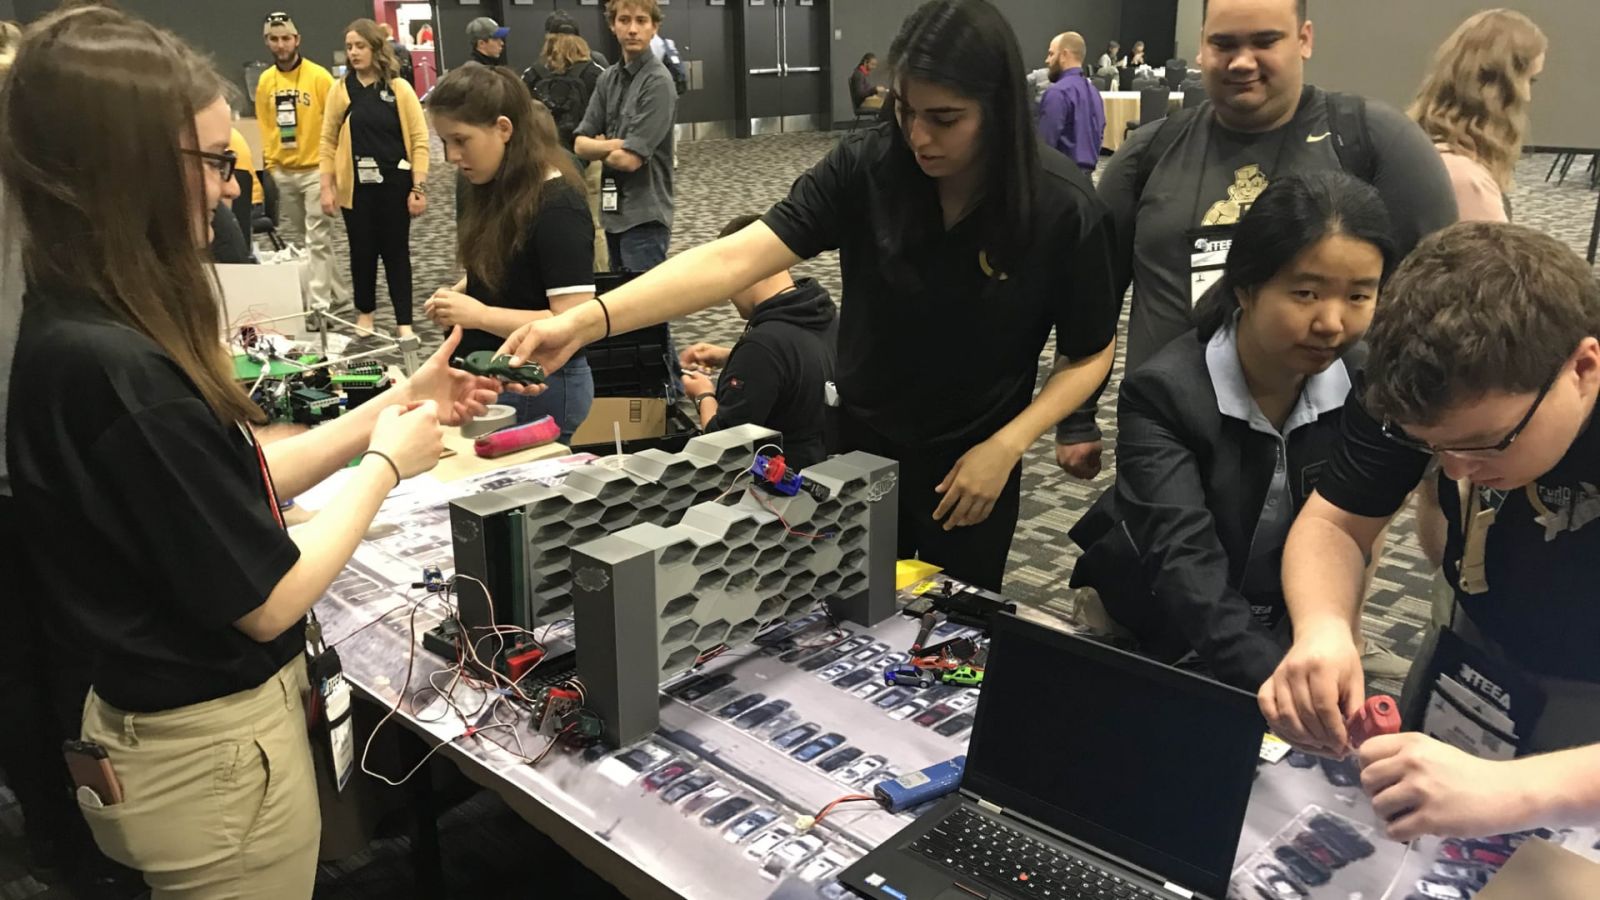 Purdue Polytechnic students Daphne Fauber, Vanessa Santana, Zach Laureano, Liwei Zhang and Brian DeRome engage their problem-solving skills at the 2019 ITEEA conference.